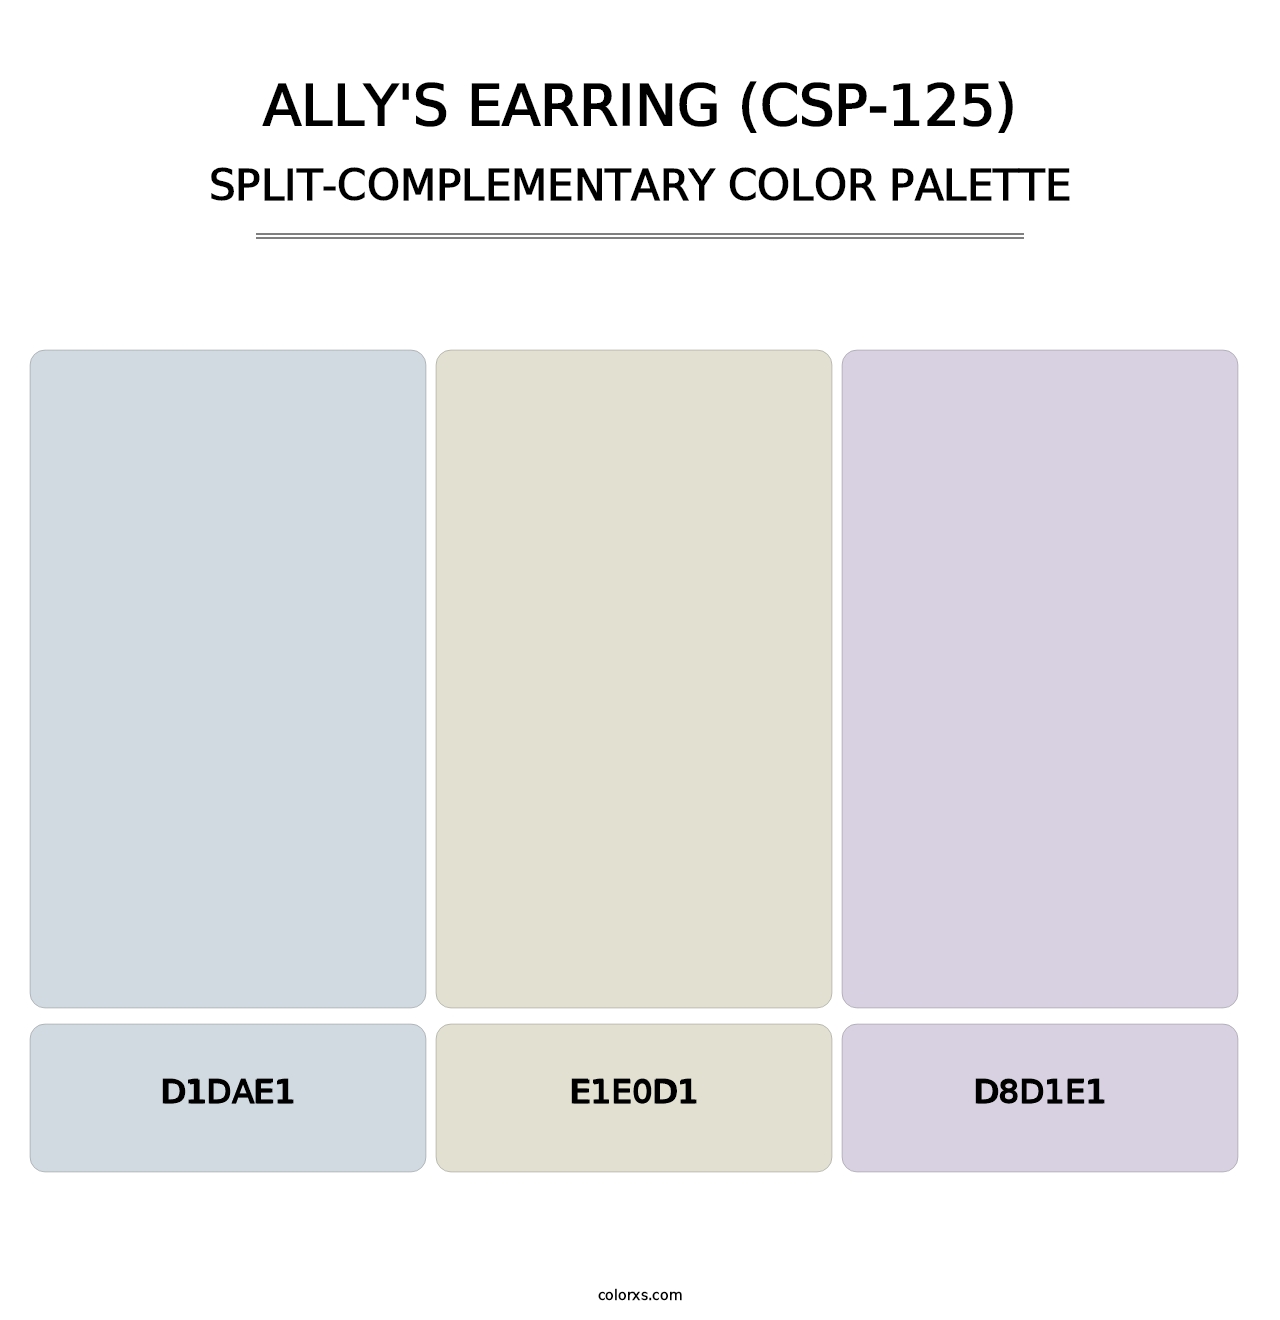 Ally's Earring (CSP-125) - Split-Complementary Color Palette